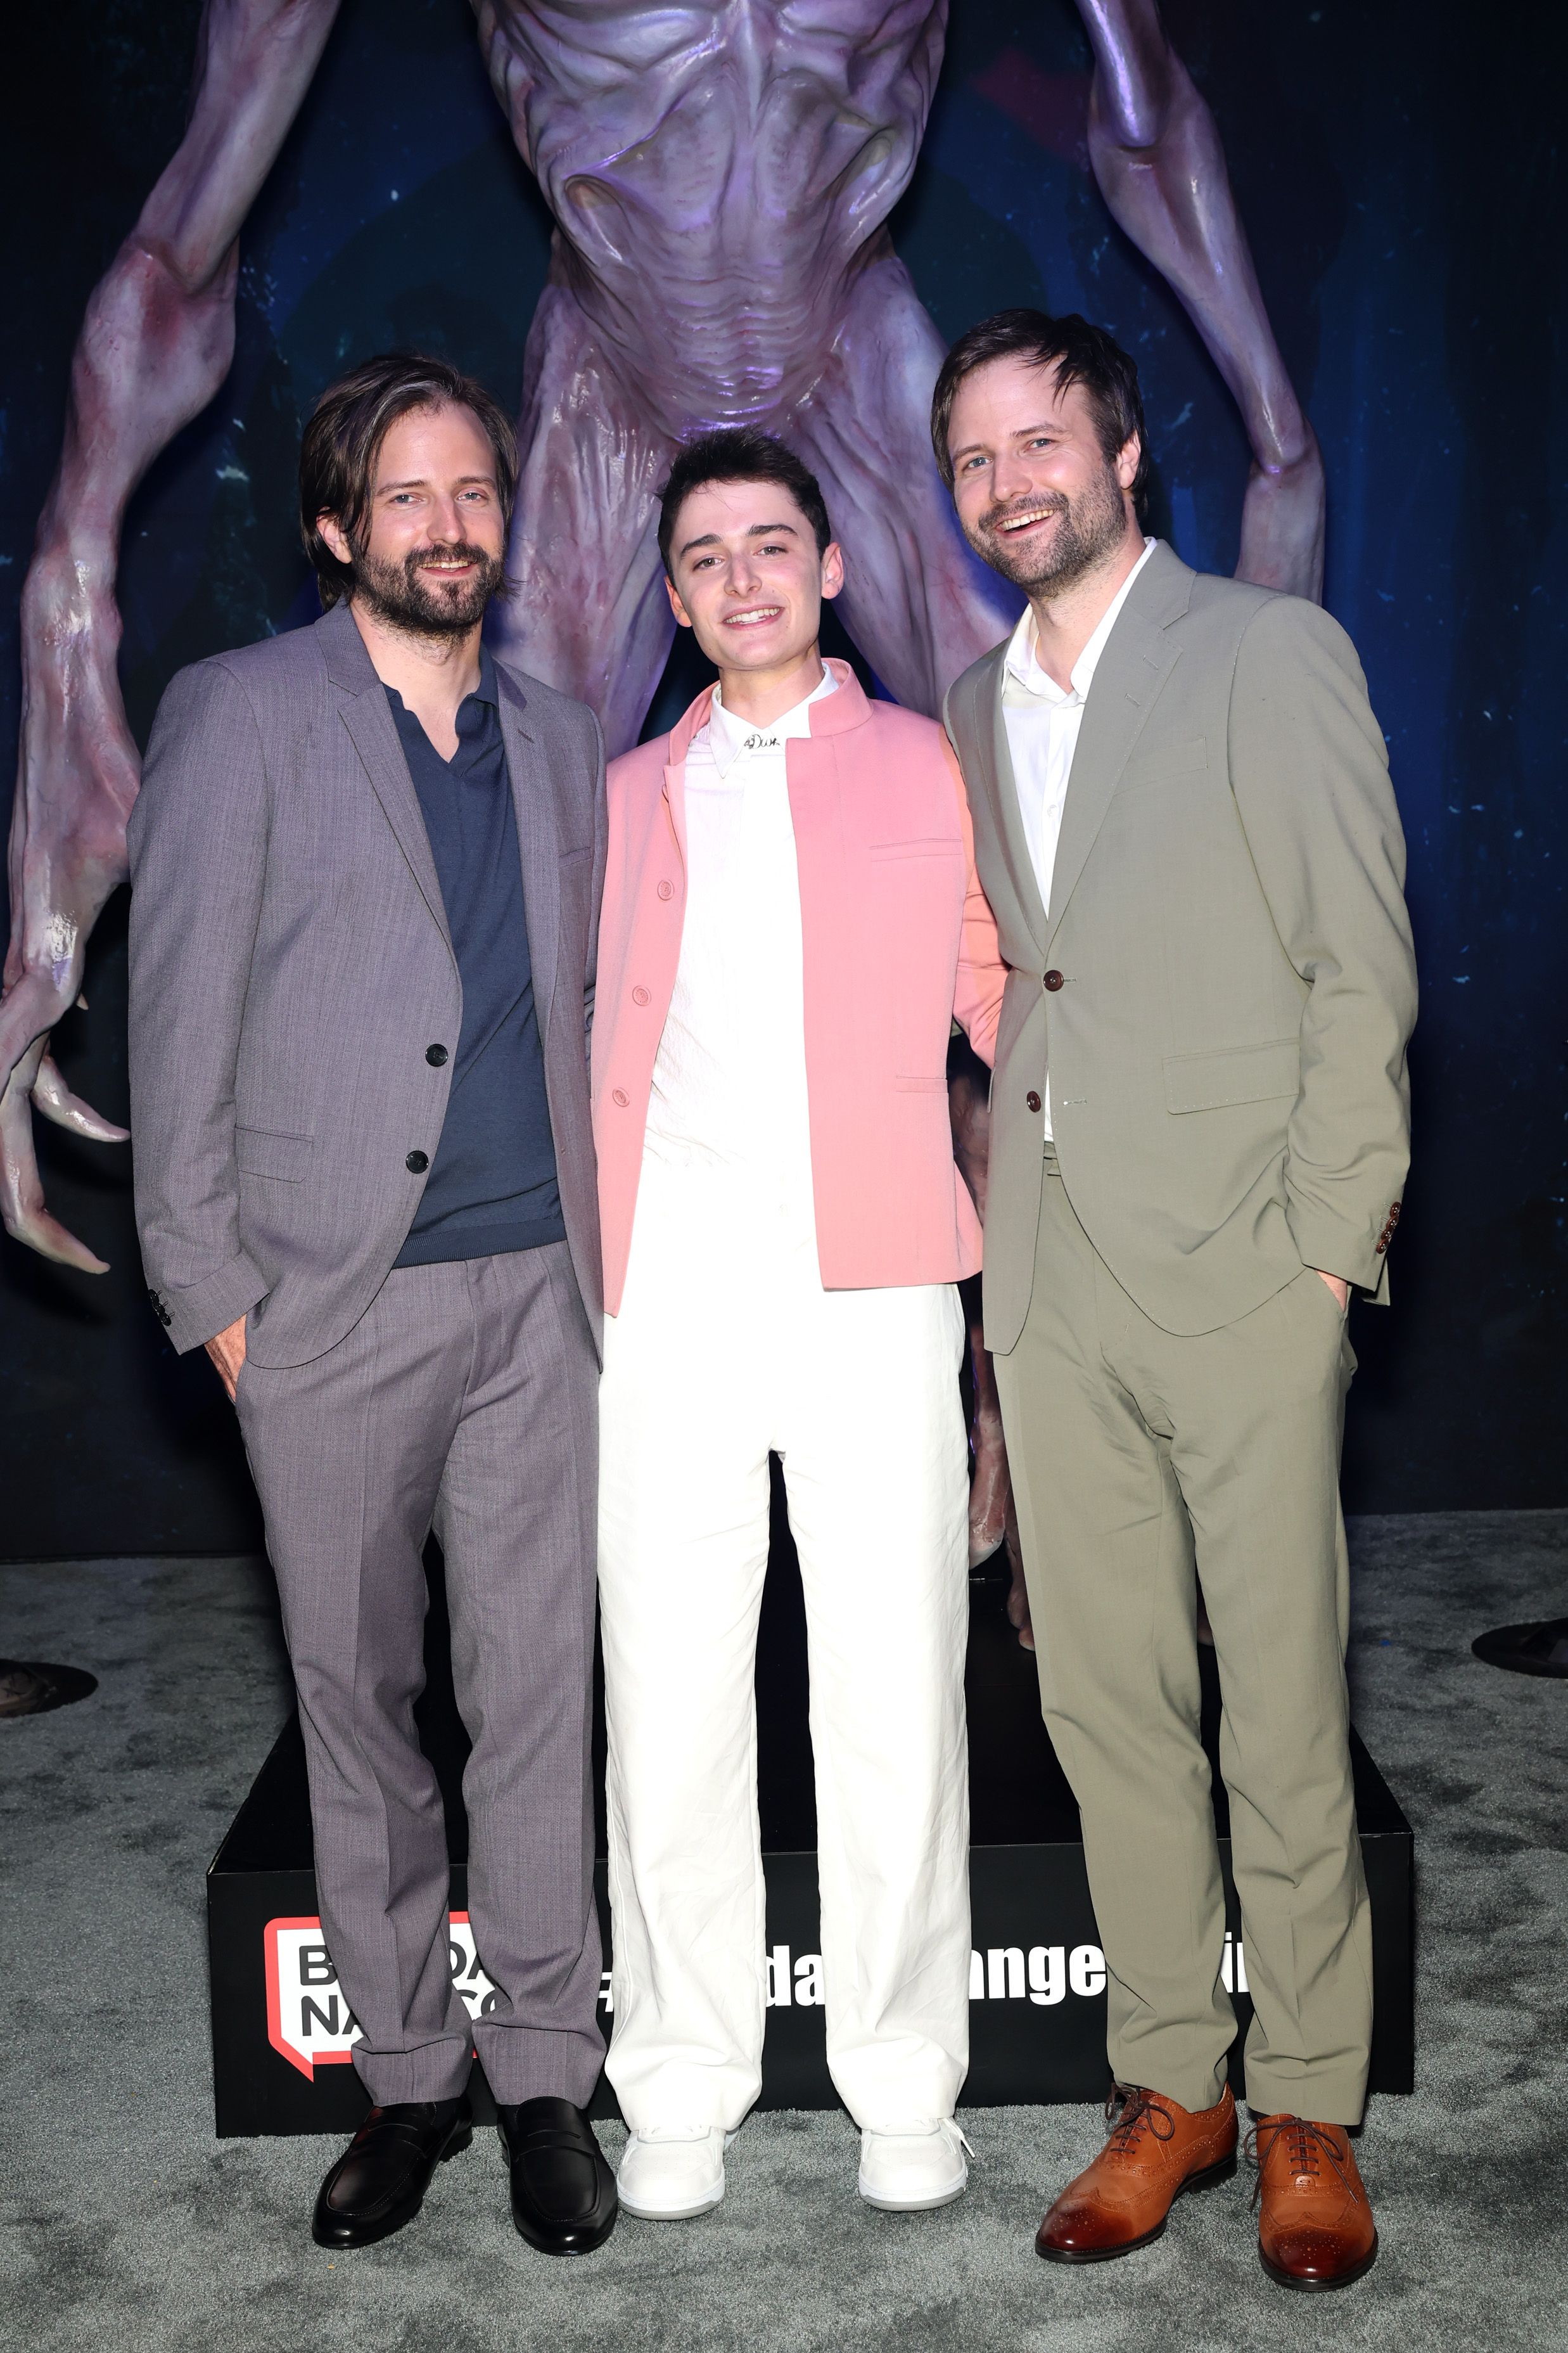 Duffer Brothers Accidentally Forgot About Will's Birthday on “Stranger  Things 4”